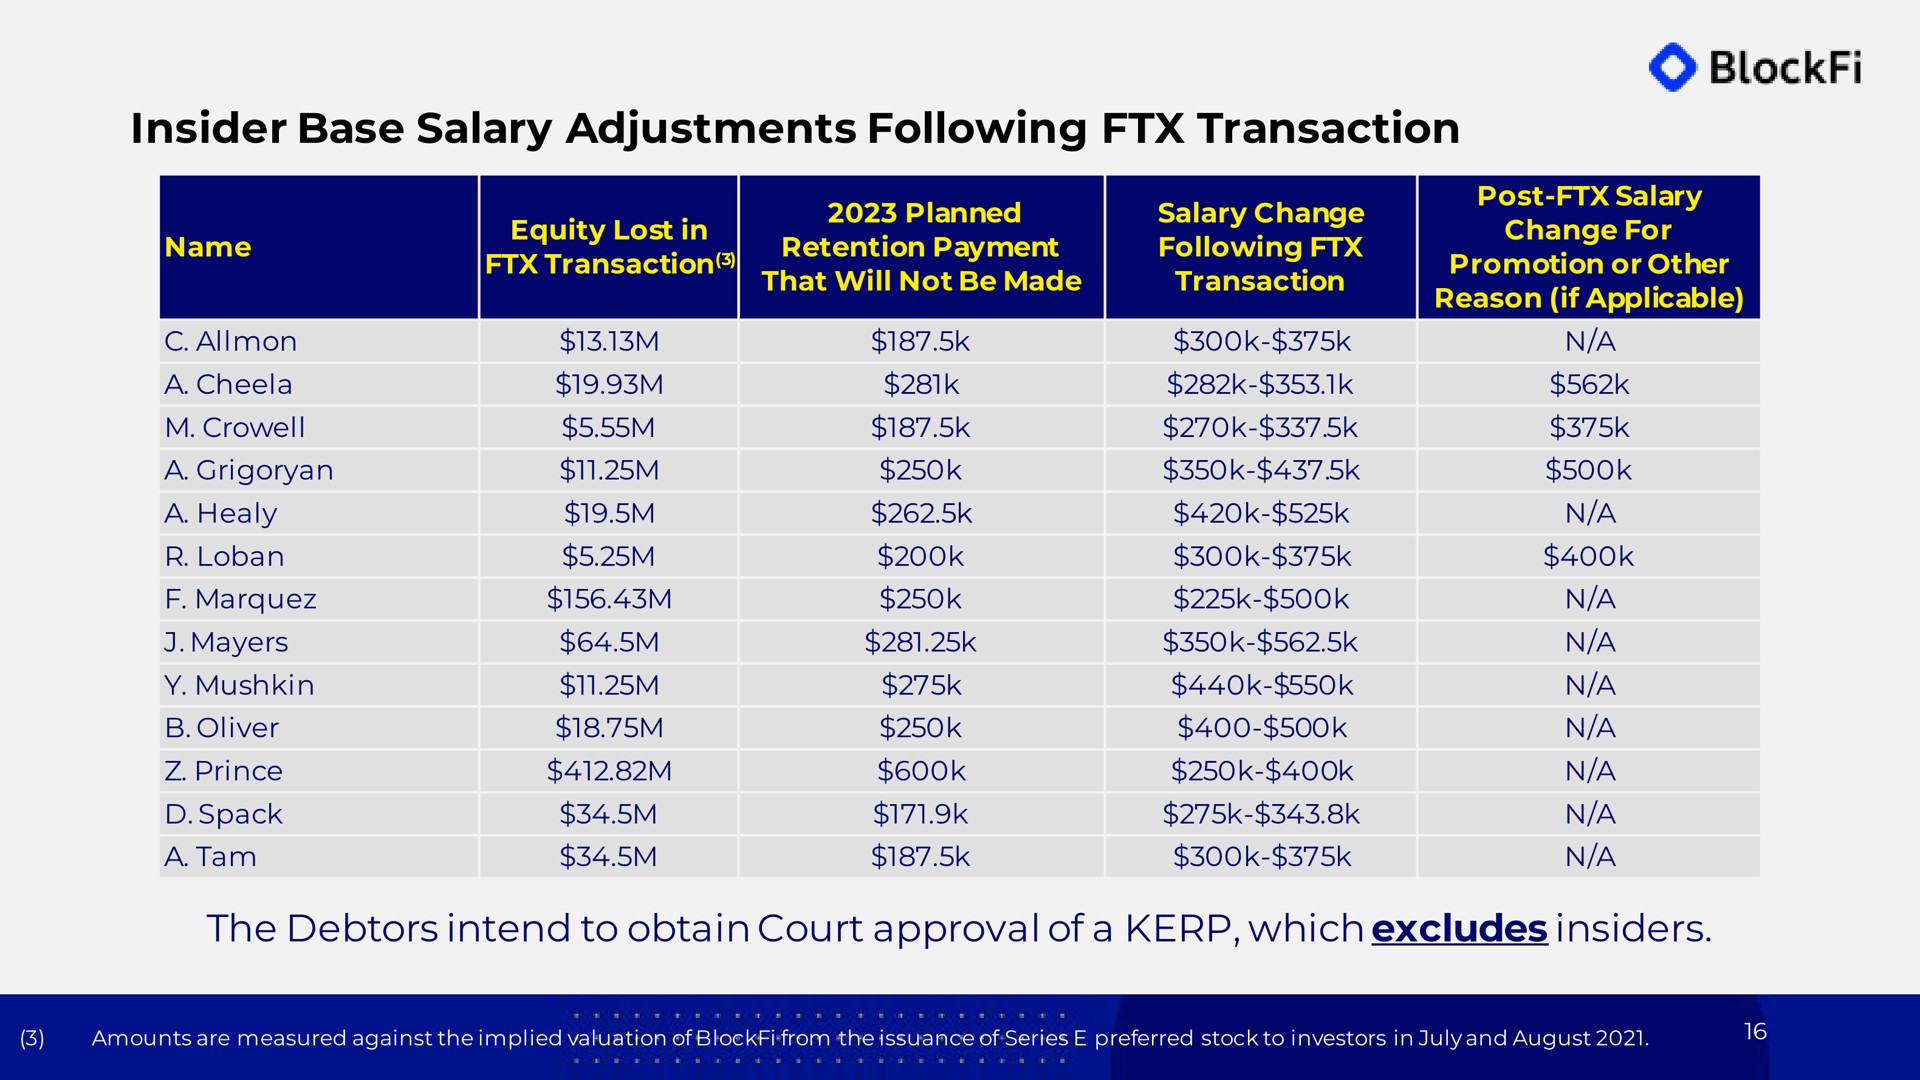 insider base salary adjustments following transaction the debtors intend to obtain court approval of a which excludes insiders in me | BlockFi